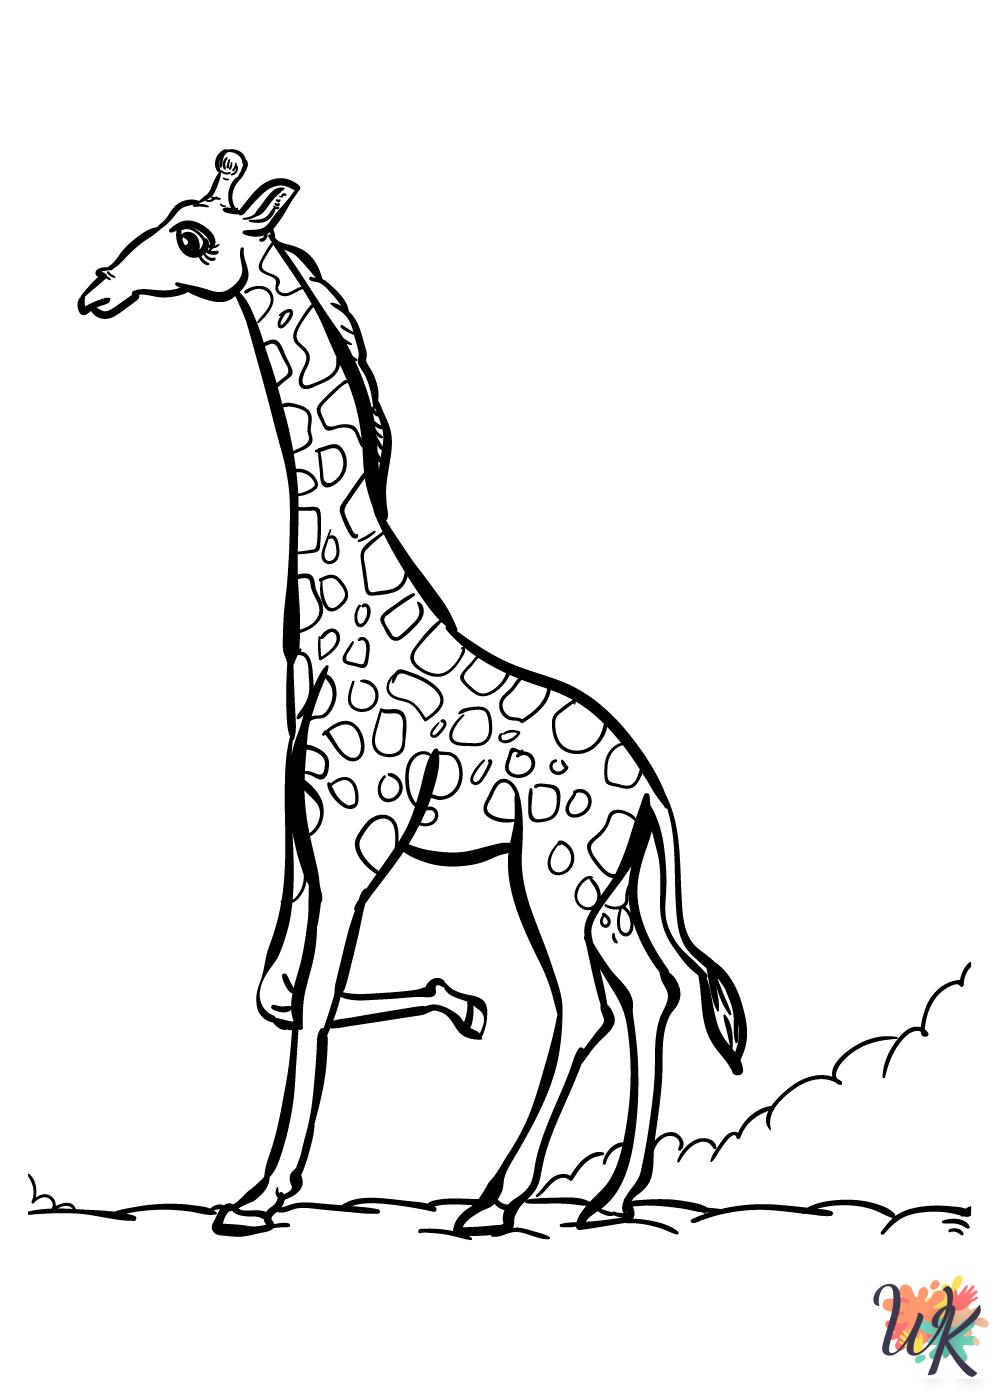 Giraffe coloring pages printable free